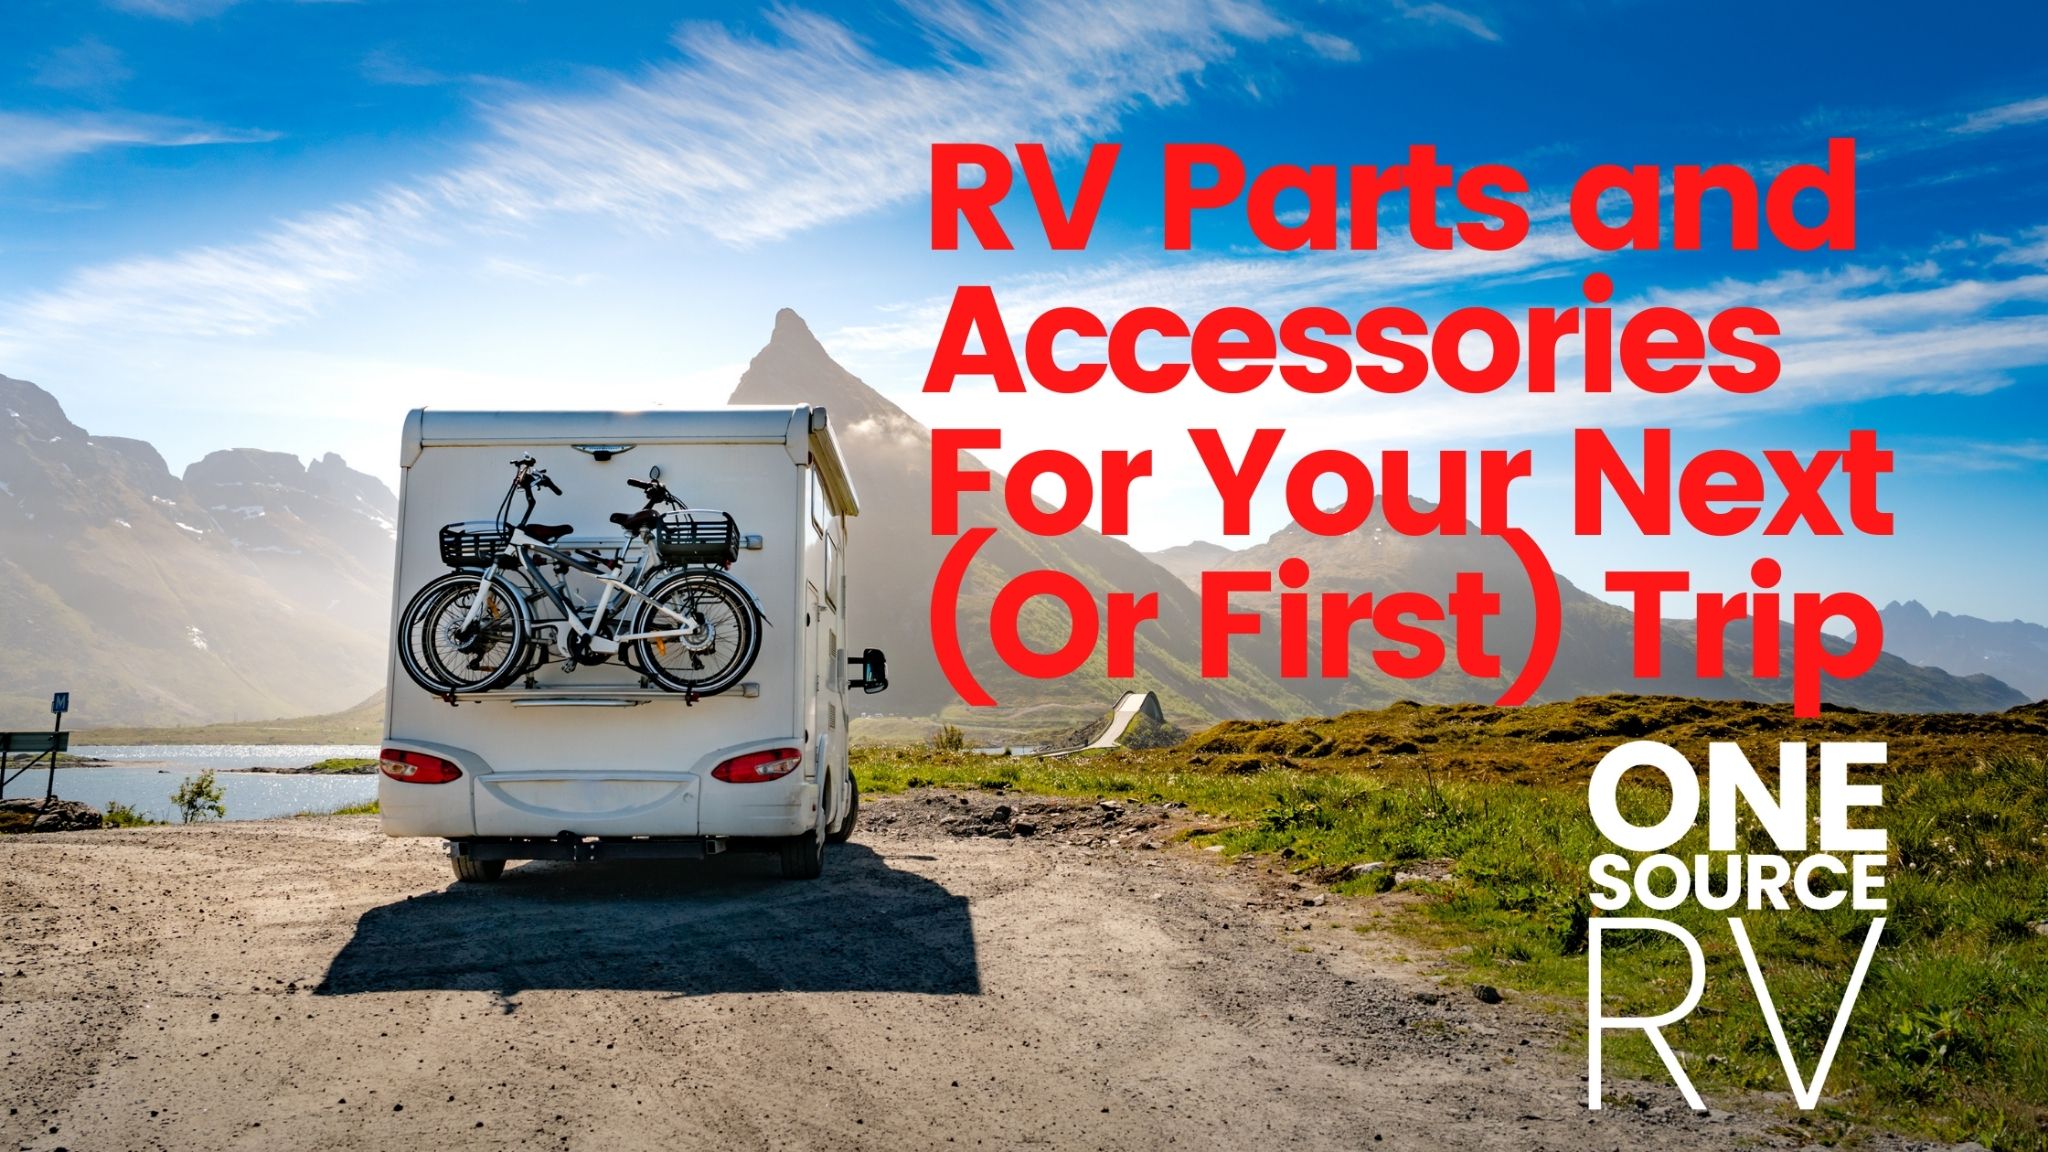 RV Parts and Accessories For Your Next (Or First) Trip